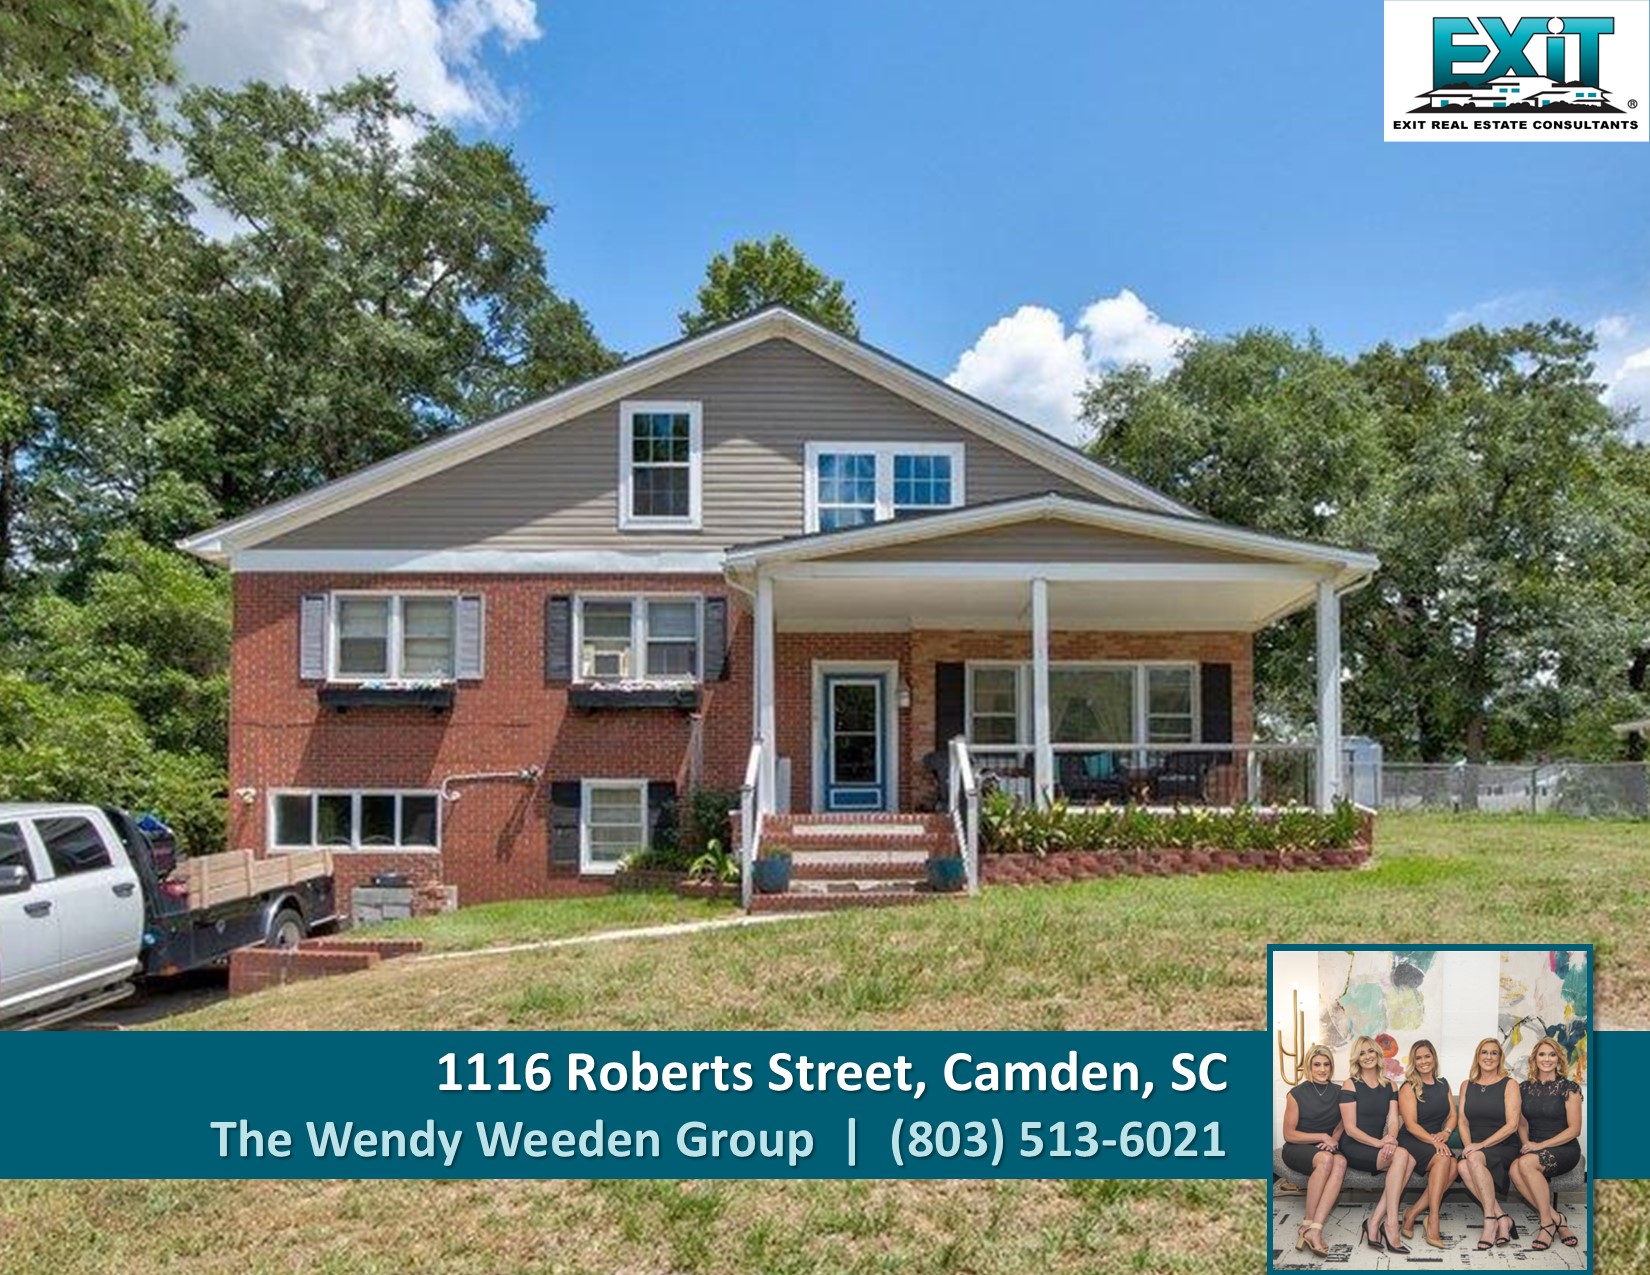 Just listed in Camden